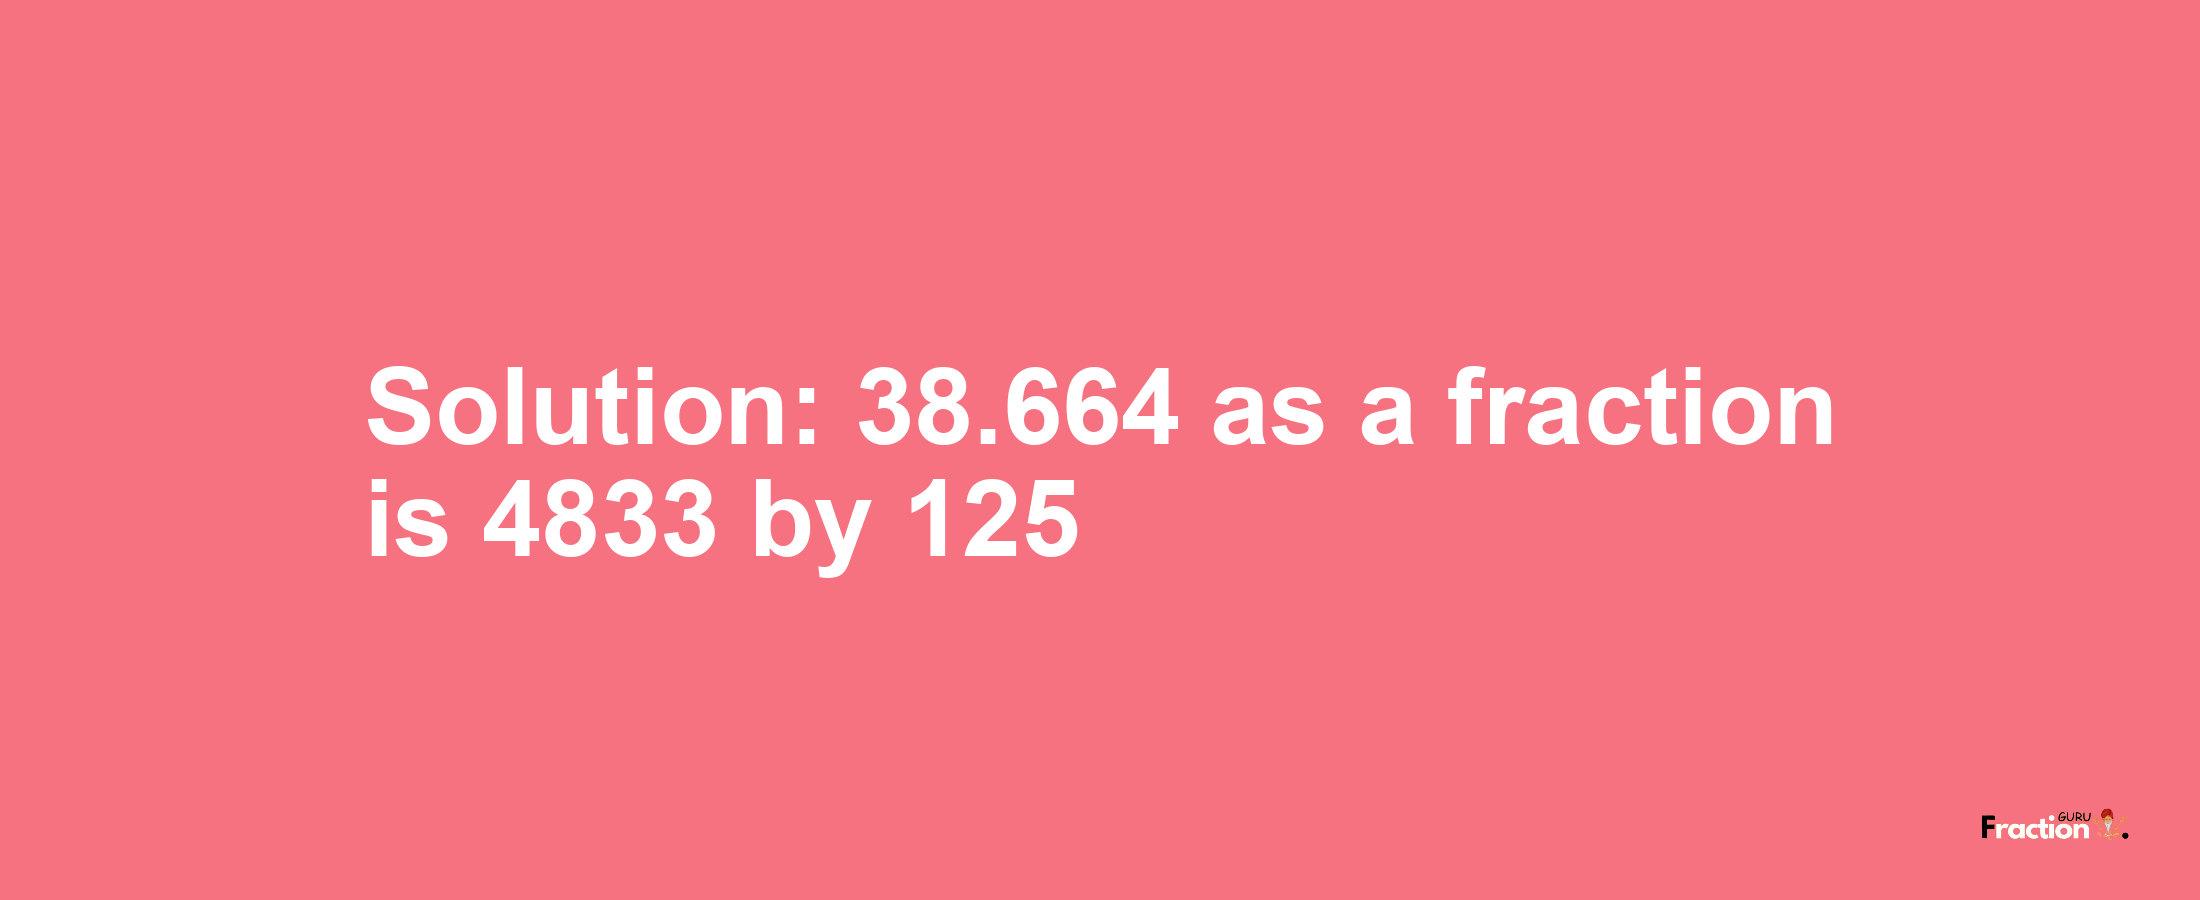 Solution:38.664 as a fraction is 4833/125